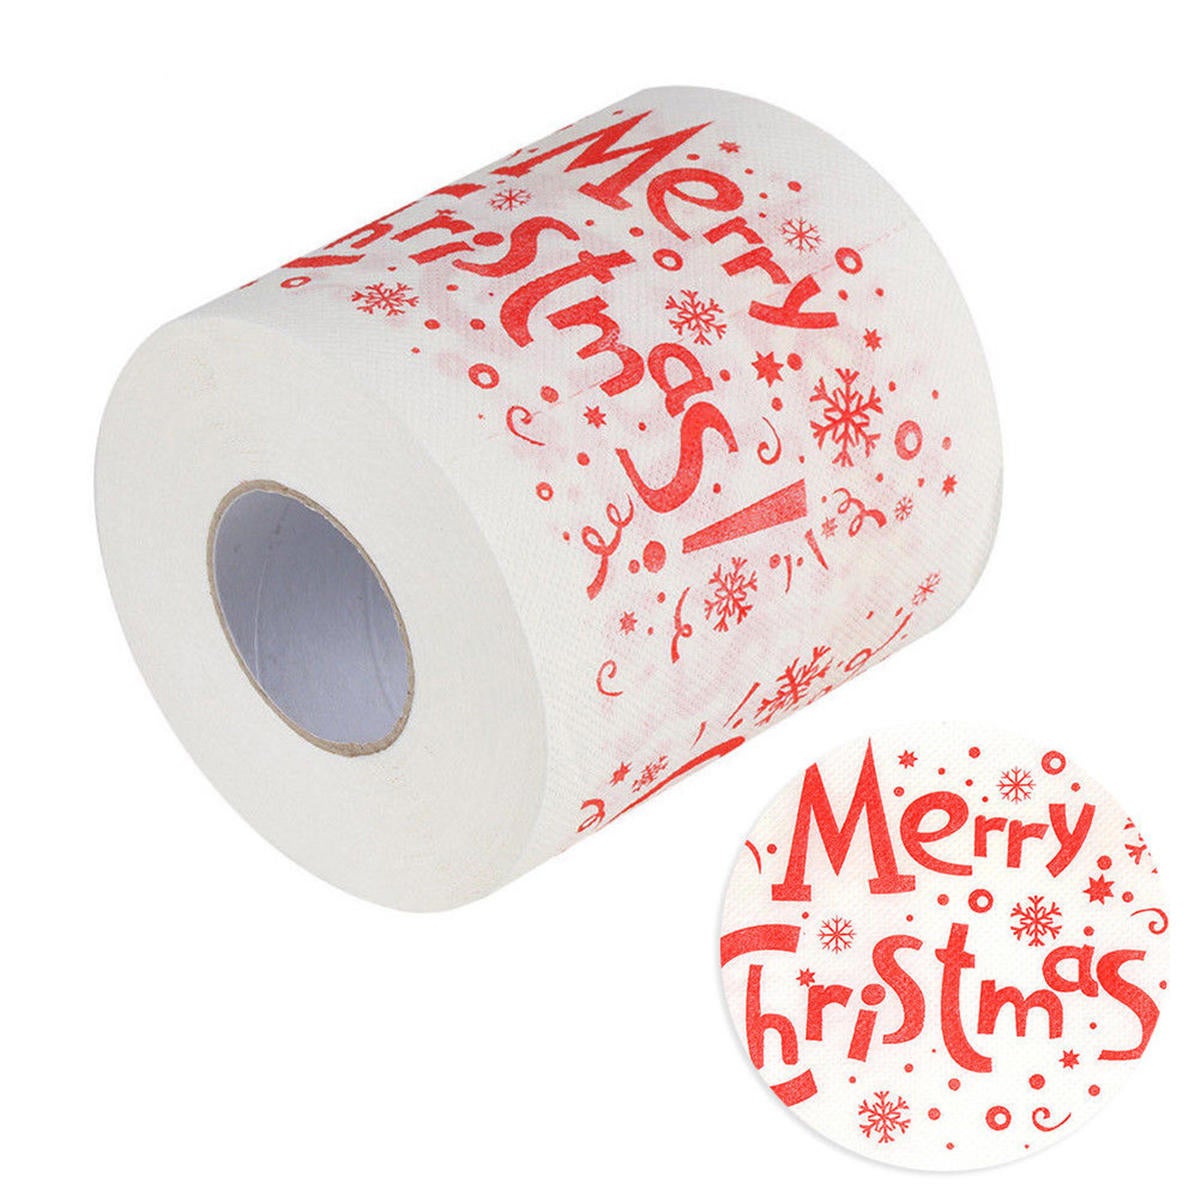 Santa Claus Printed Merry Christmas Toilet Roll Paper Tissue Table Home Decorations 05 SPECIFICATION